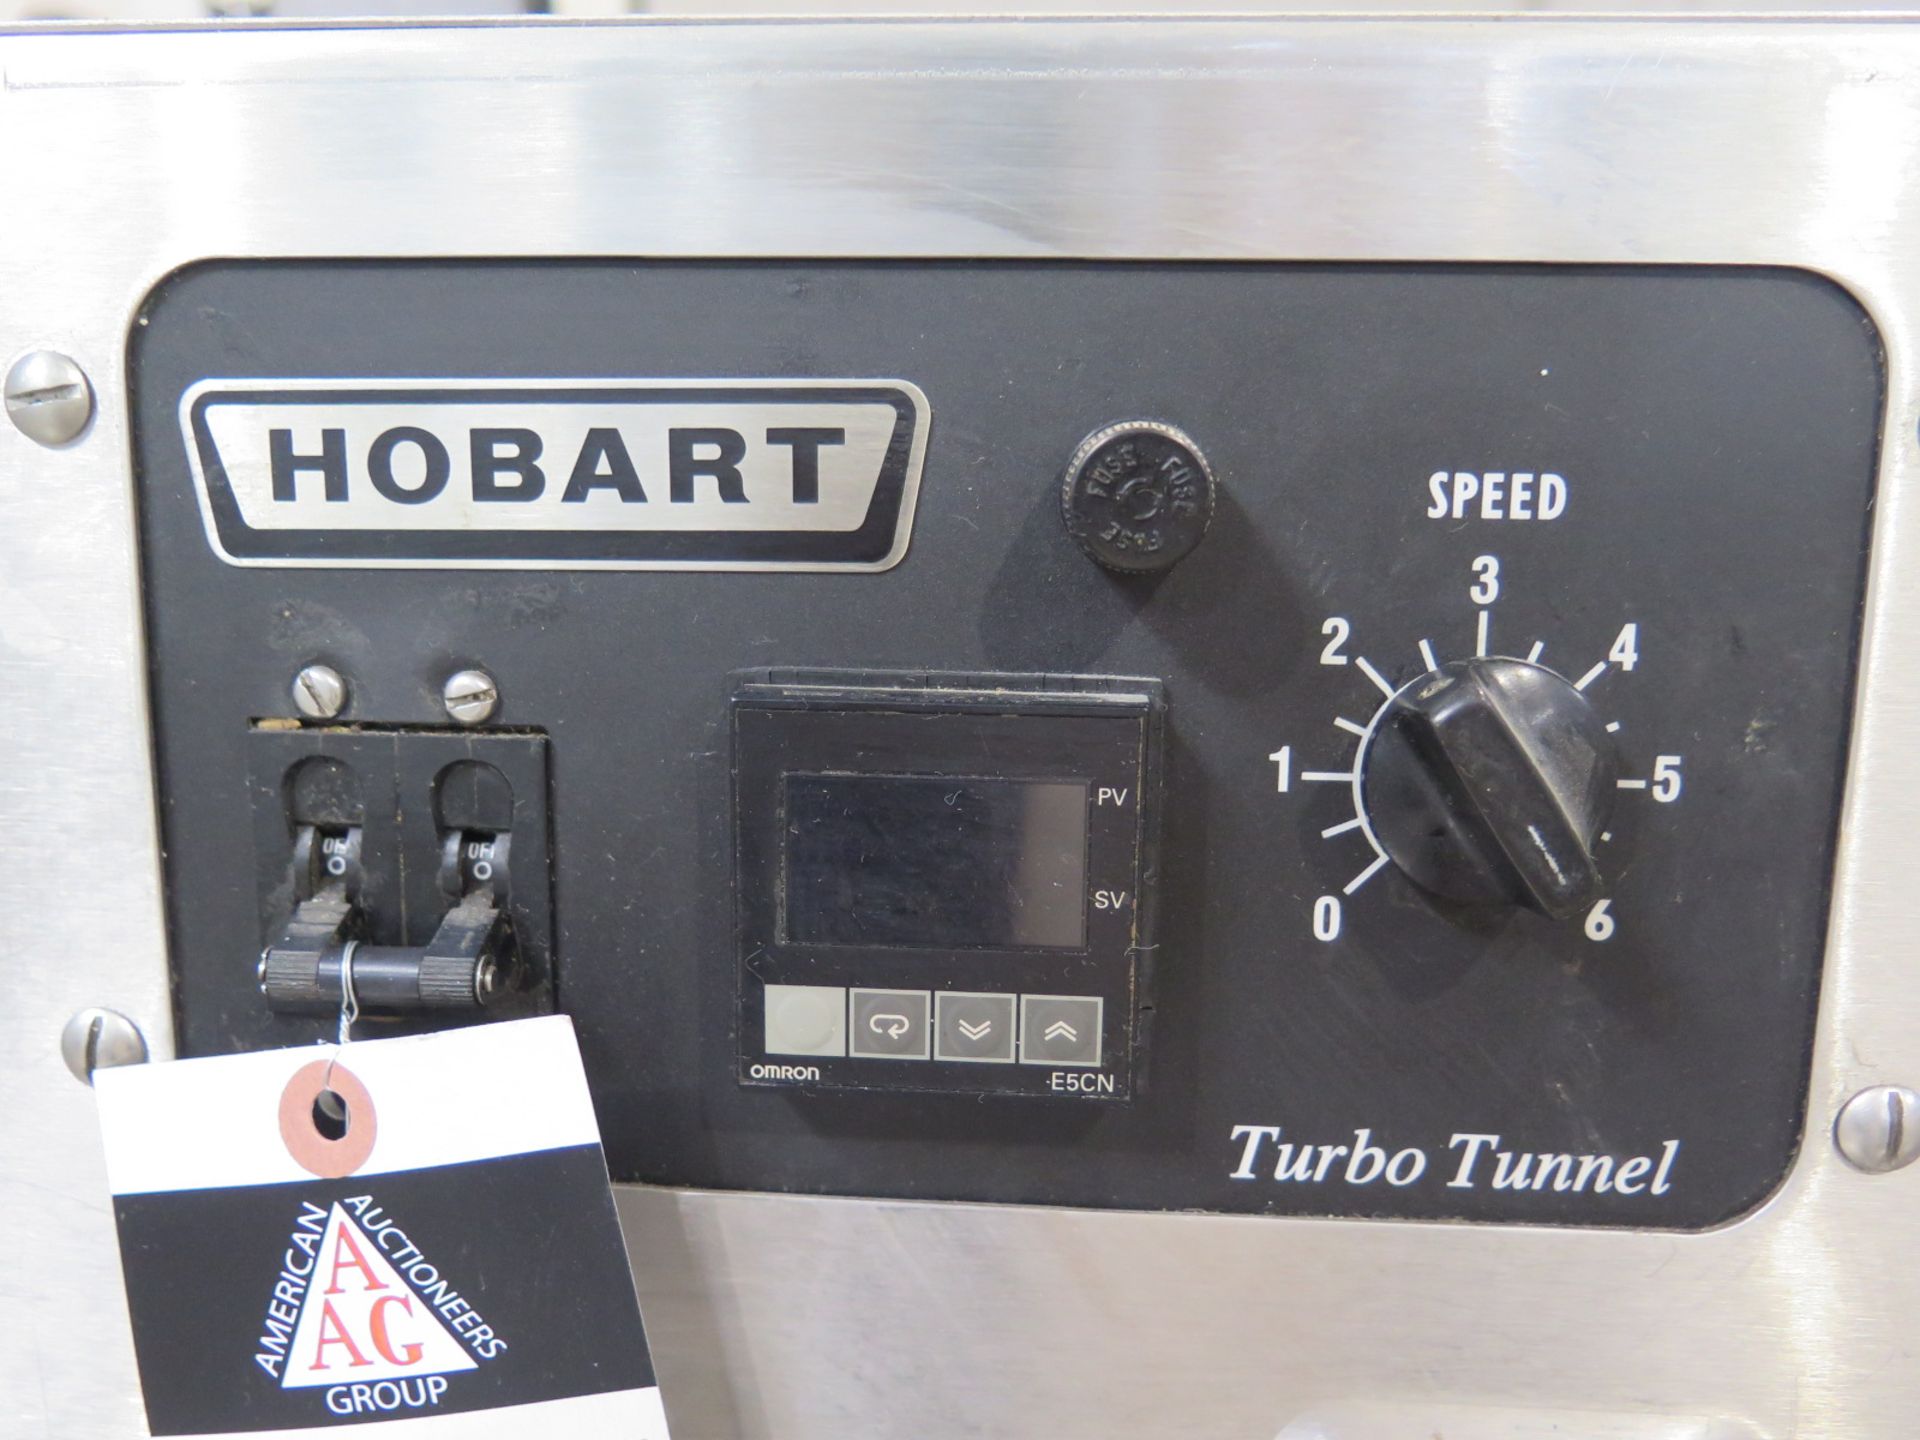 Hobart "Turbo Tunnel" mdl. 1734T-1 Pass Thru 8kW Oven s/n 05-1038829 - Image 2 of 4